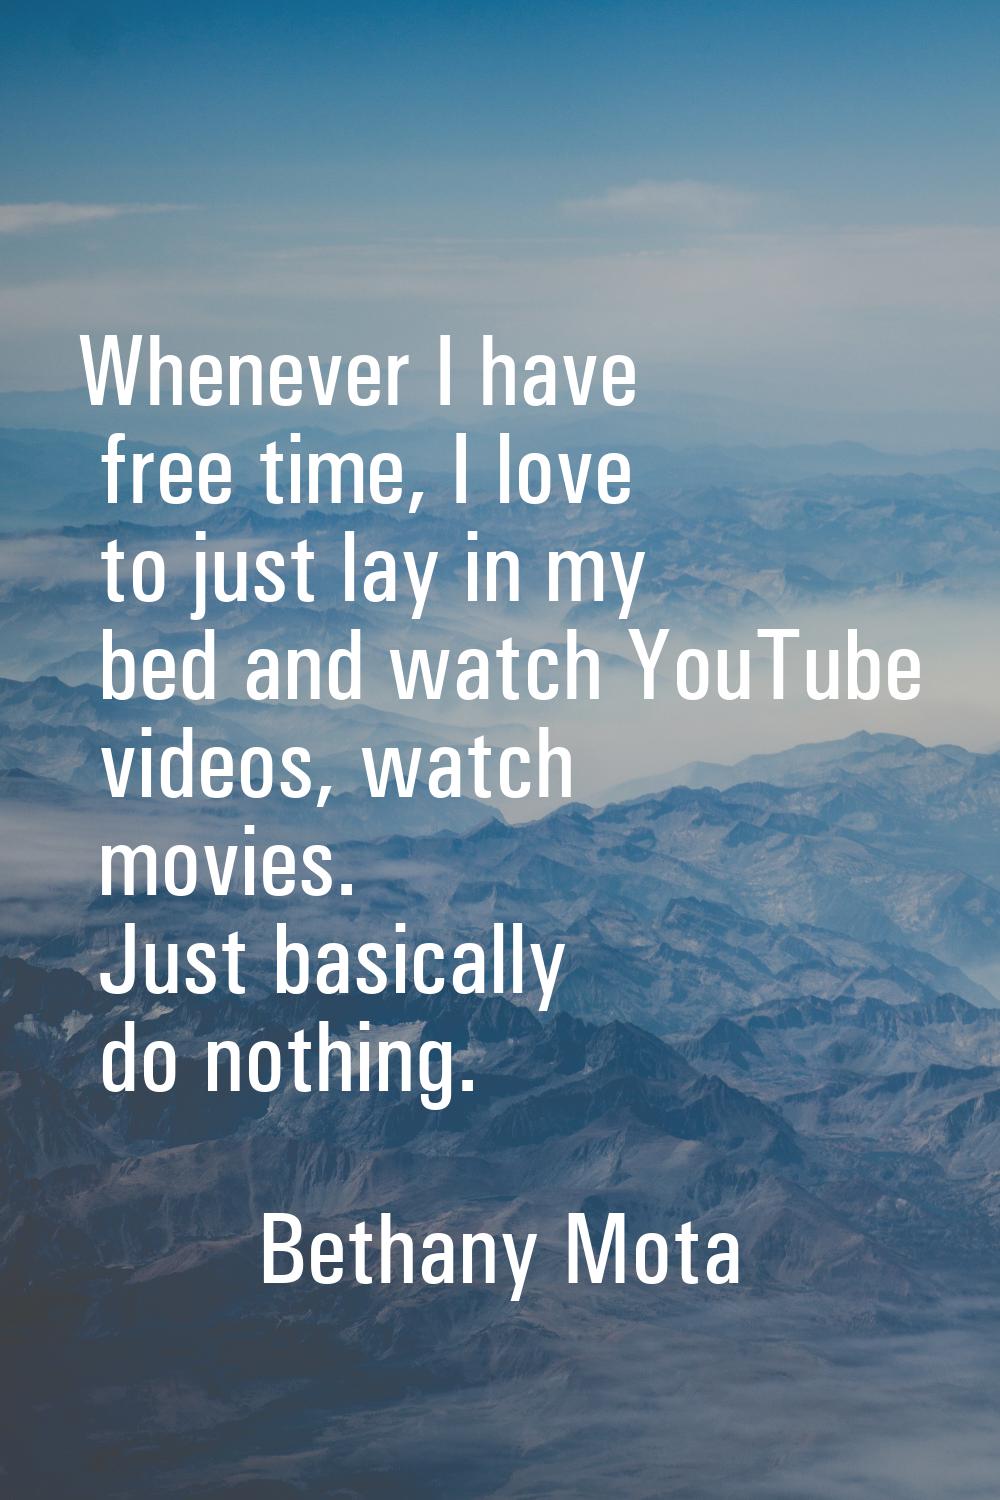 Whenever I have free time, I love to just lay in my bed and watch YouTube videos, watch movies. Jus